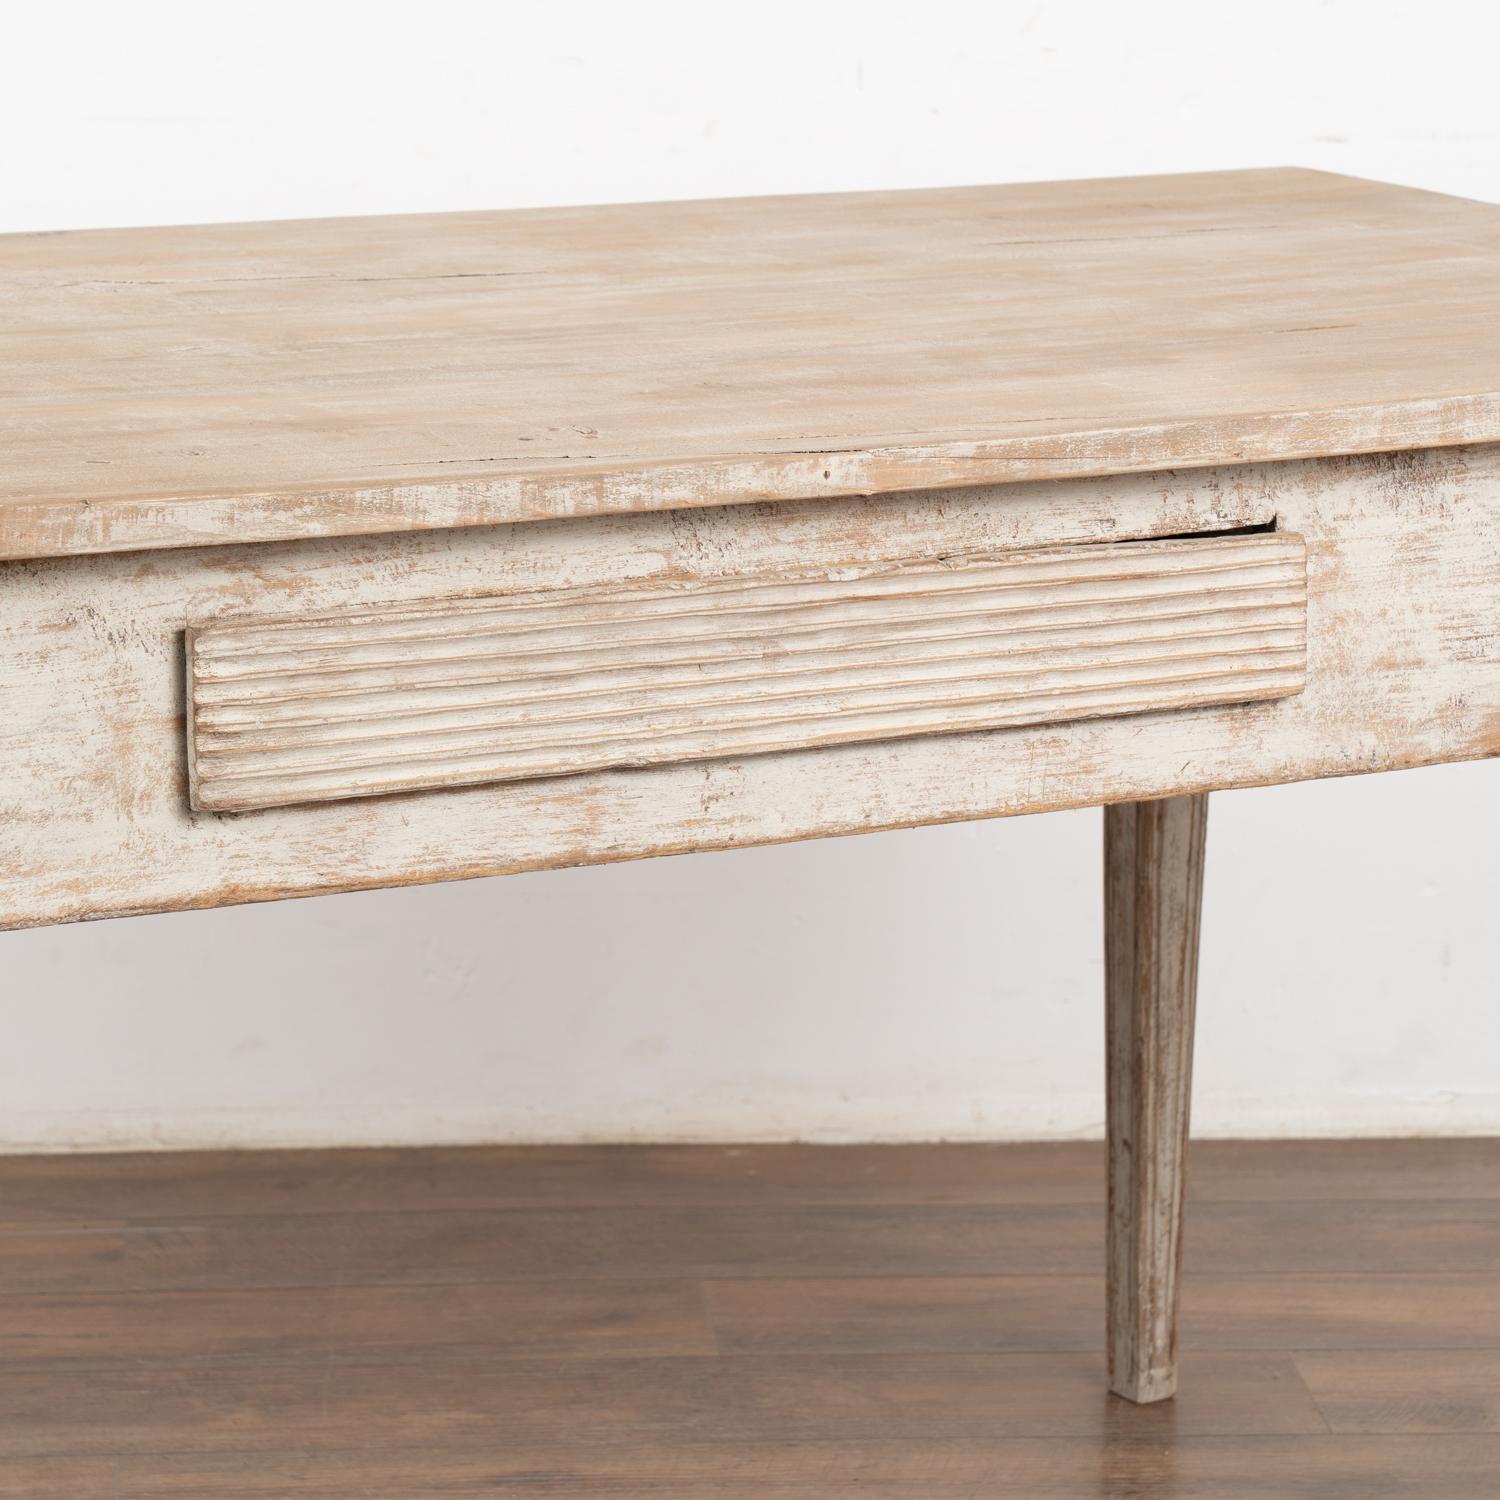 White Painted Gustavian Style Table Writing Desk With One Drawer, circa 1860-80 For Sale 1